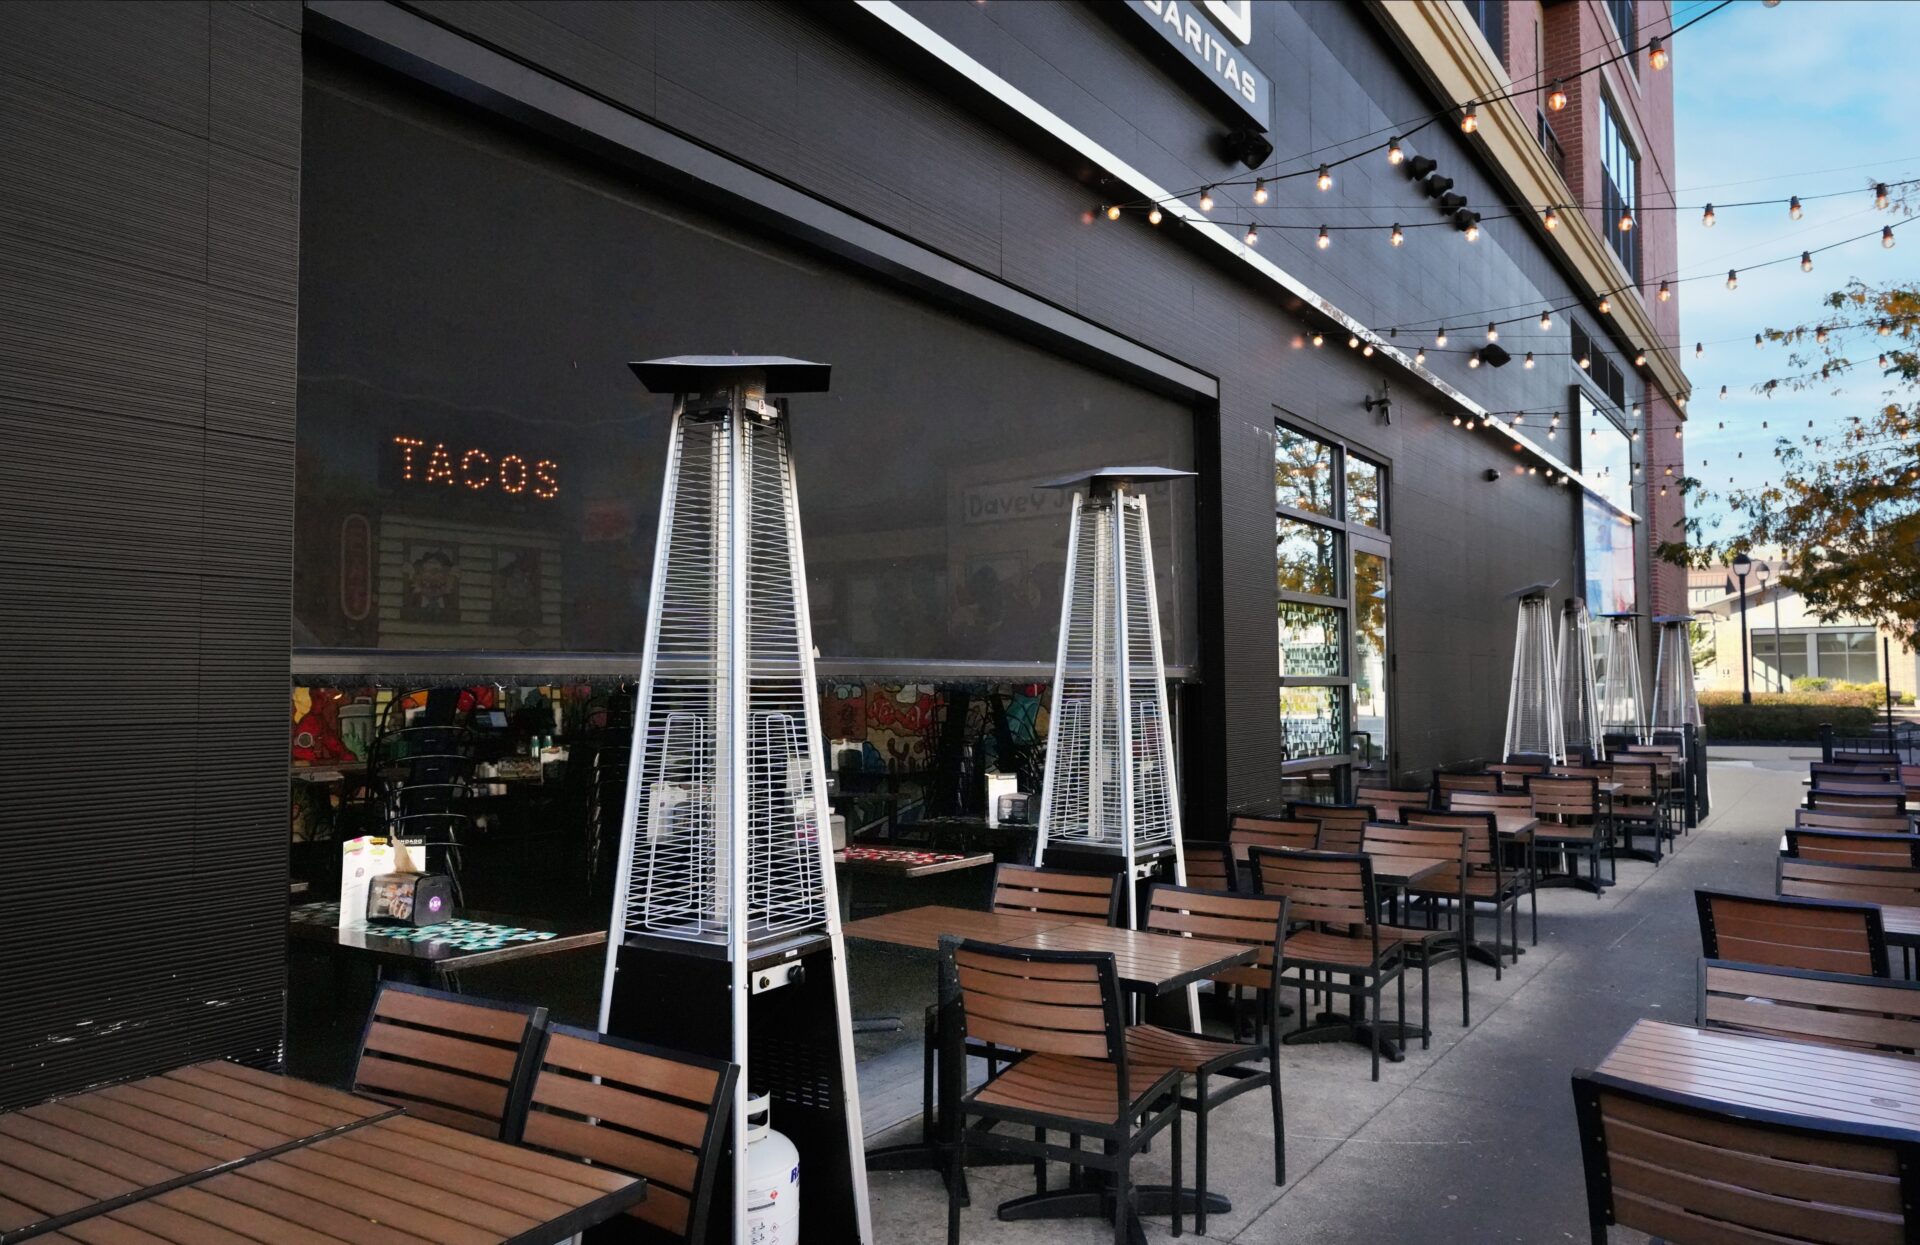 Condado Tacos is a popular local taco joint located right inside of Crocker Park. Screening Solutions Ohio installed Phantom Retractable Power Screens onto the restaurants two large garage openings. The motorized screens provide bug protection in a matter of seconds. With the touch of a button, the screens drop down and seal in the space. Whenever the screens aren’t needed, they roll up and hide away inside their protective housing units blending in with the look of the building.